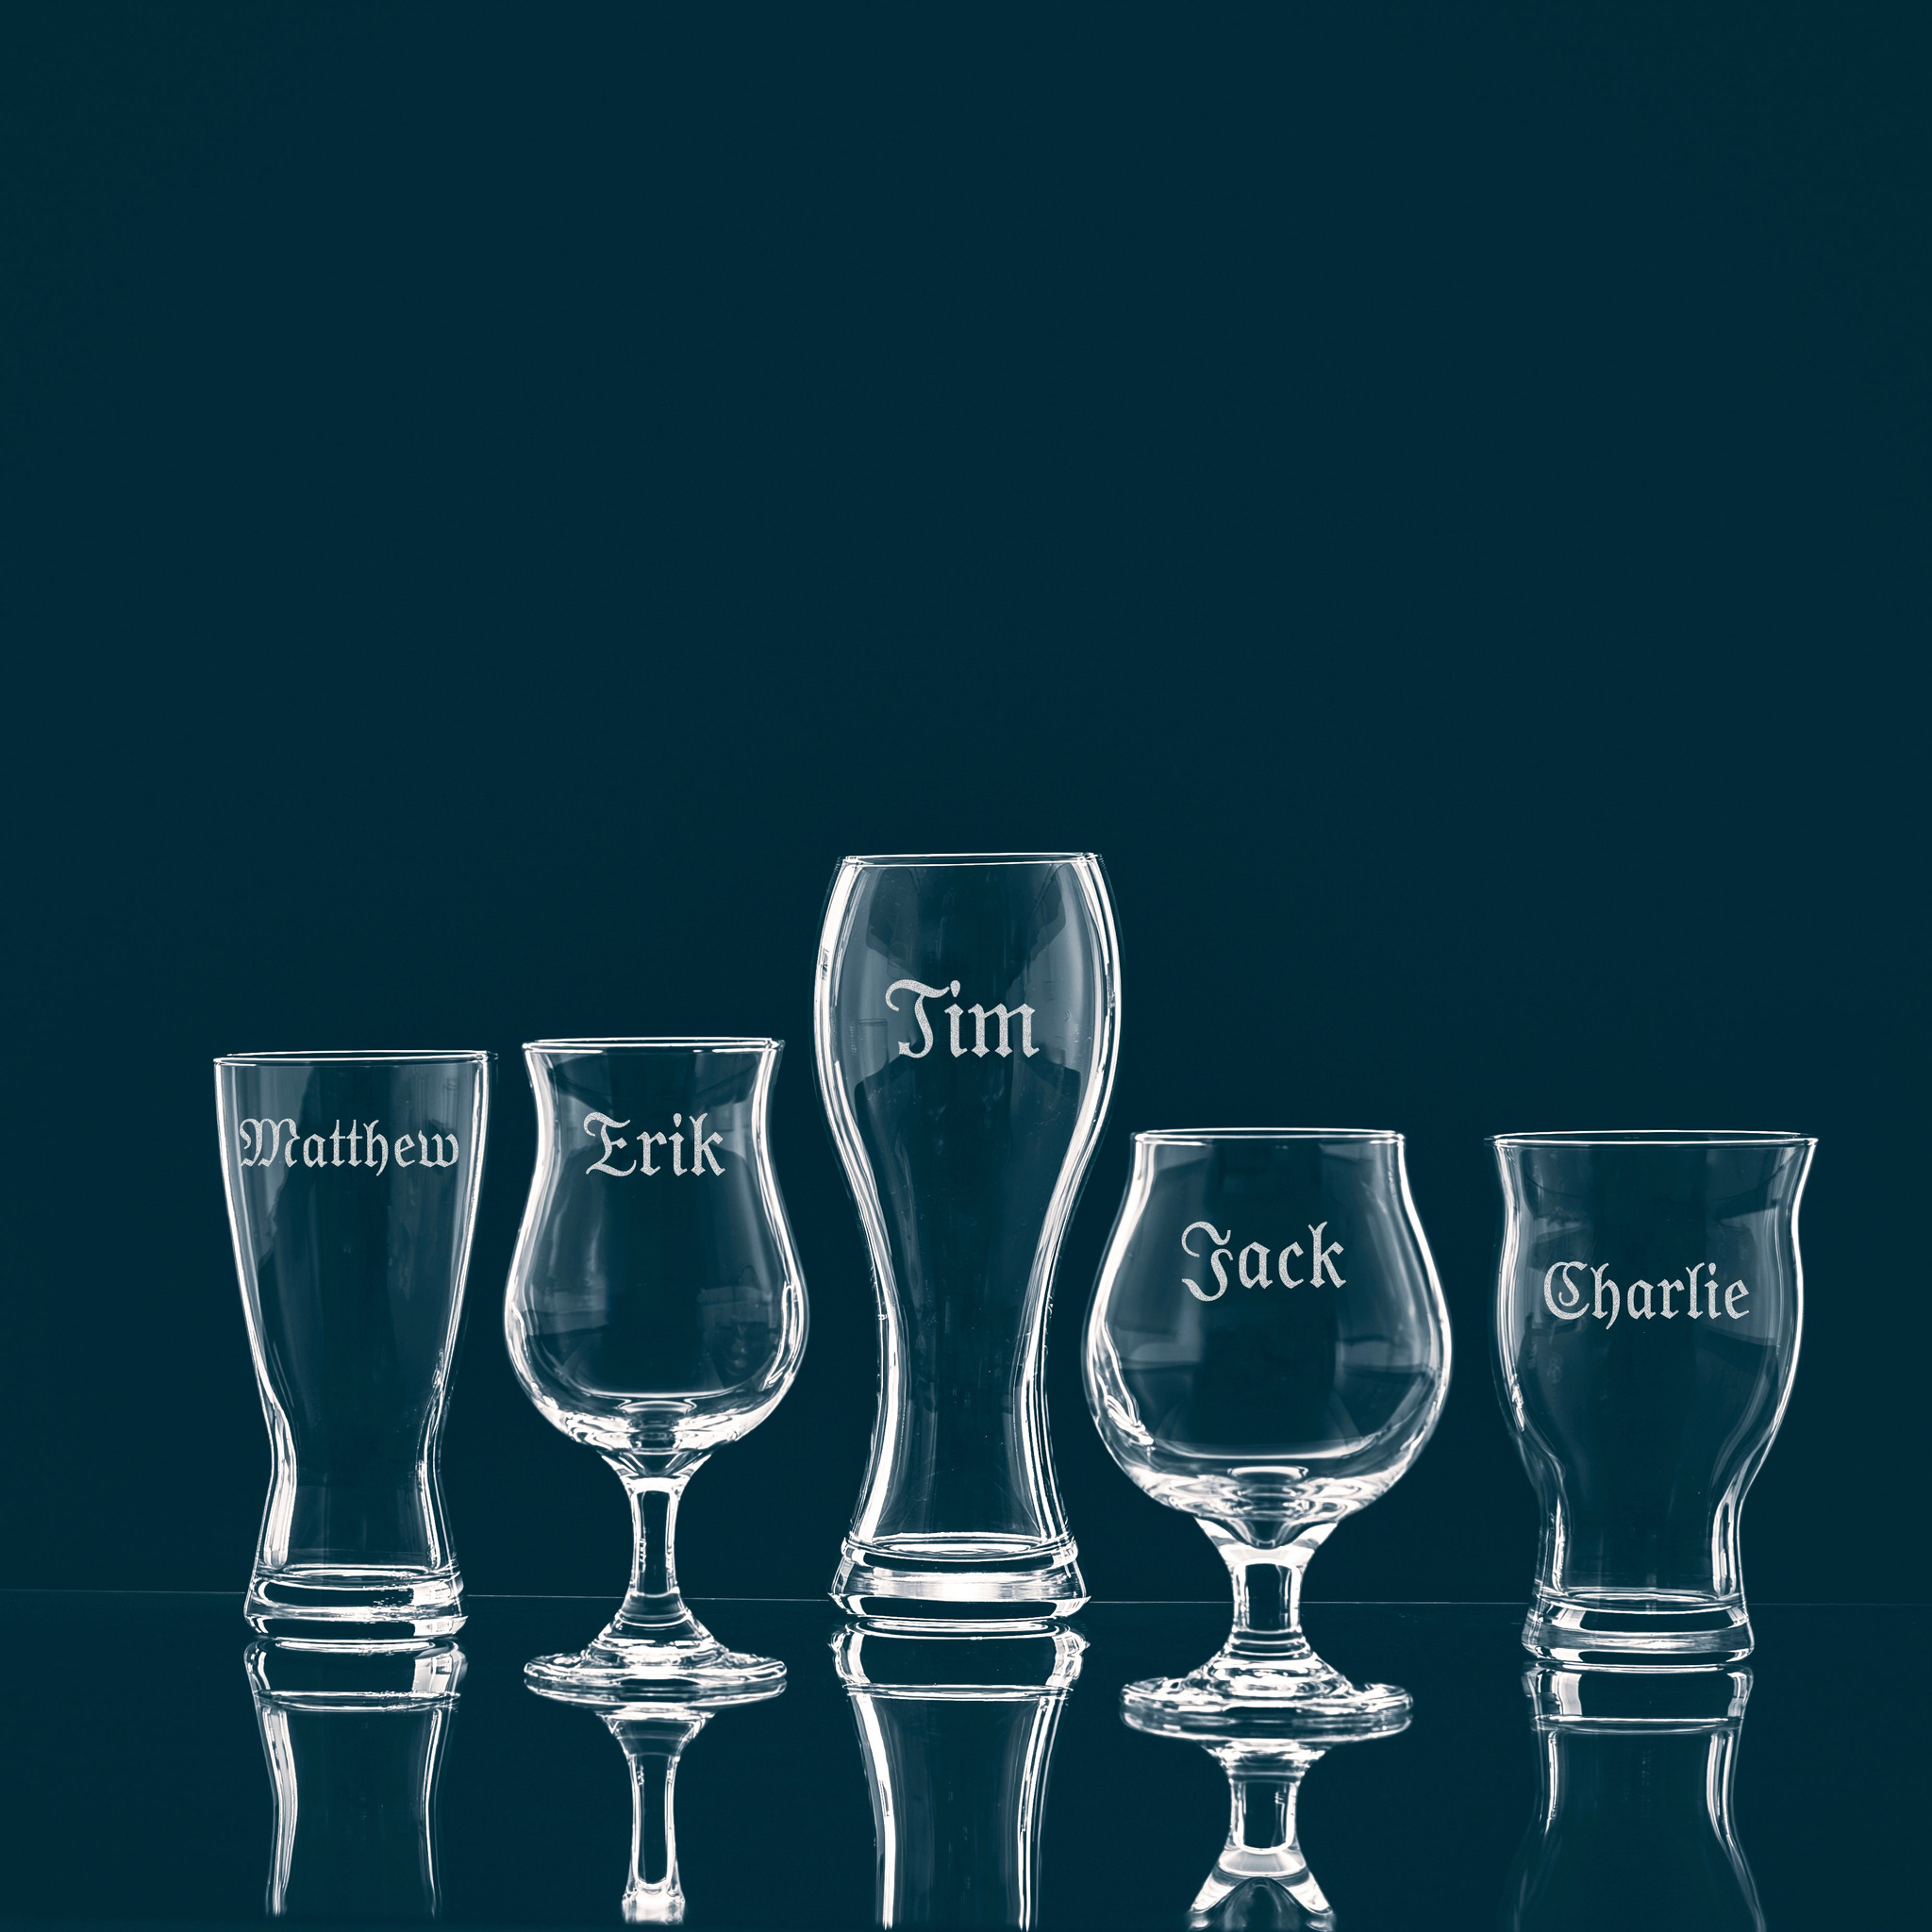 https://cdn11.bigcommerce.com/s-b5w84/images/stencil/2048x2048/products/2569/6157/9-11-23_5_beer_glasses-3_names_etched__56529.1698672763.jpg?c=2